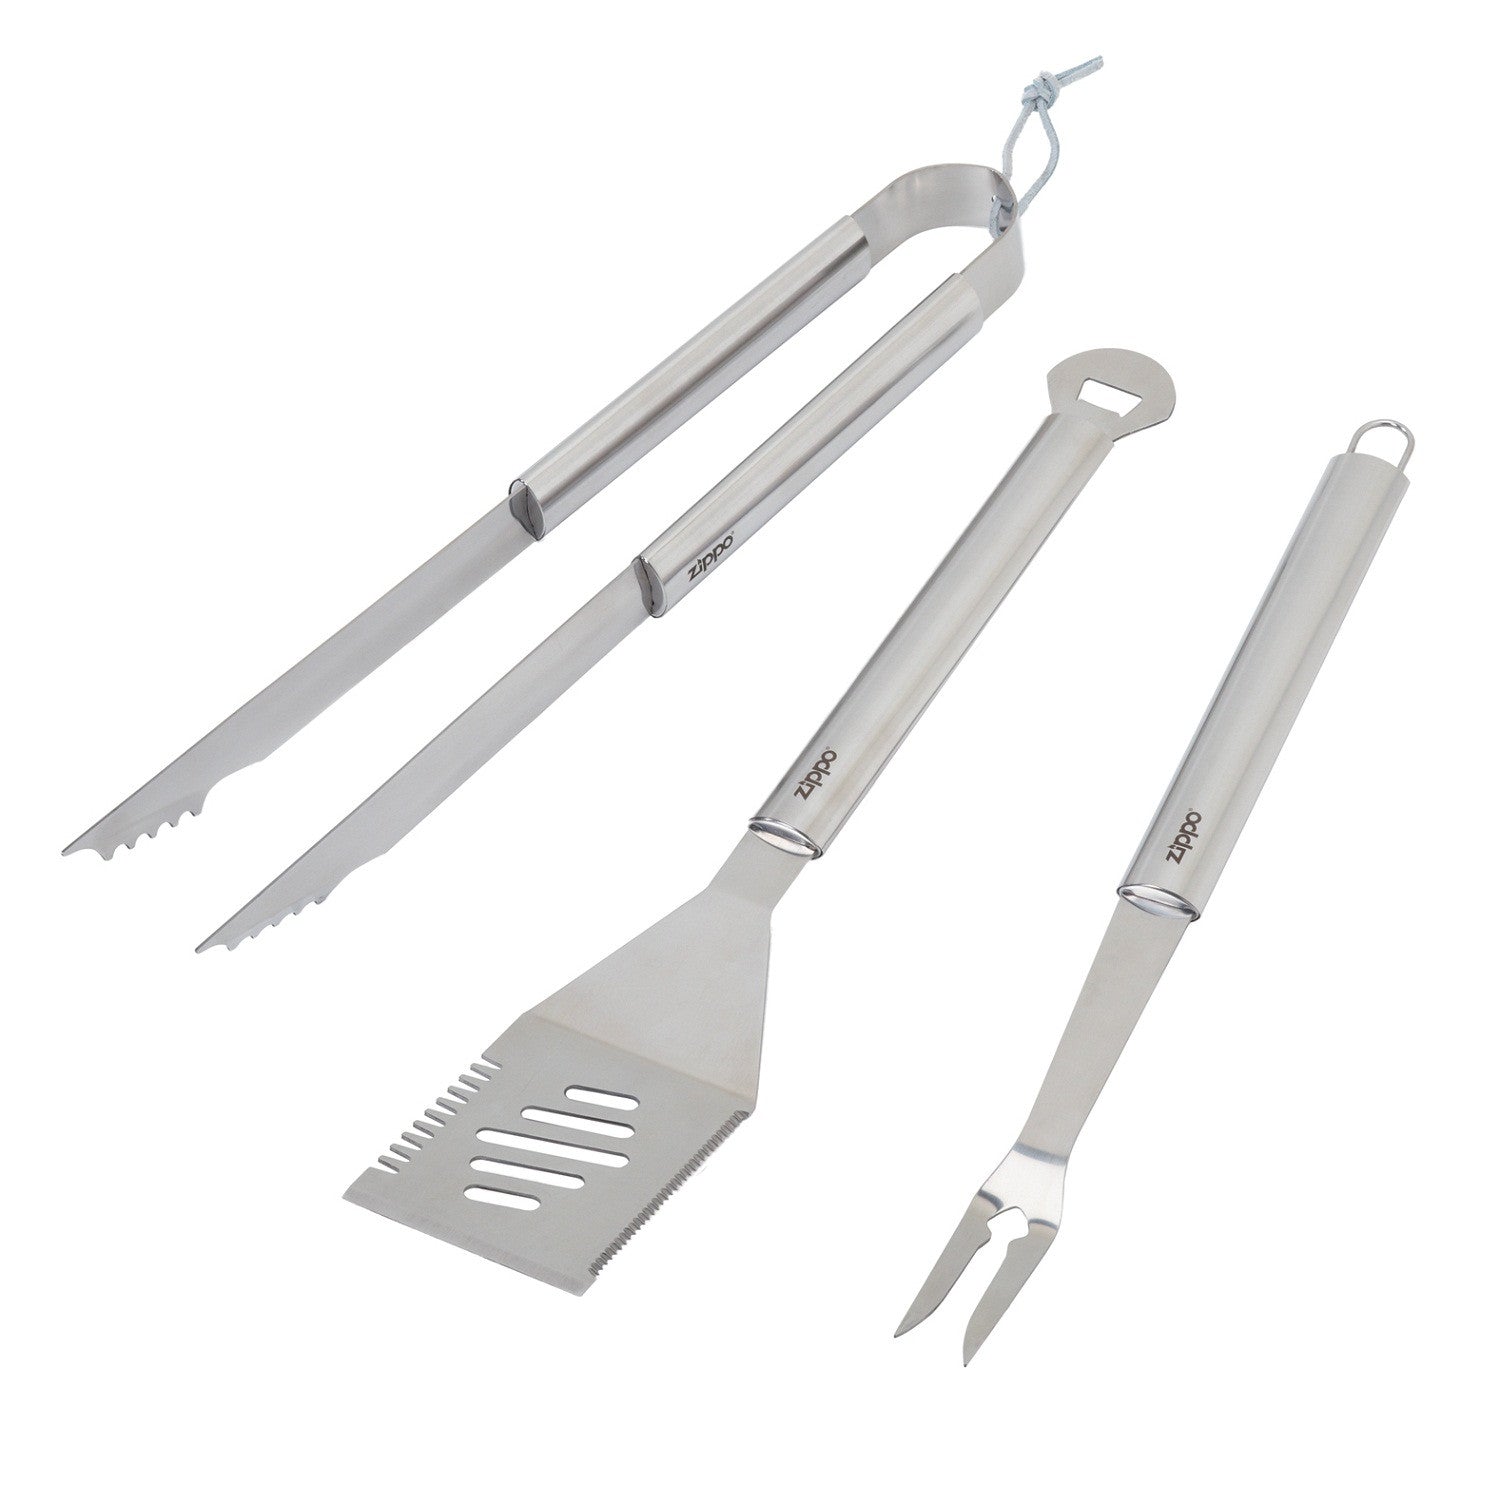 3pc Barbecue Tool Set Stainless Steel Bbq Grilling Accessories Set